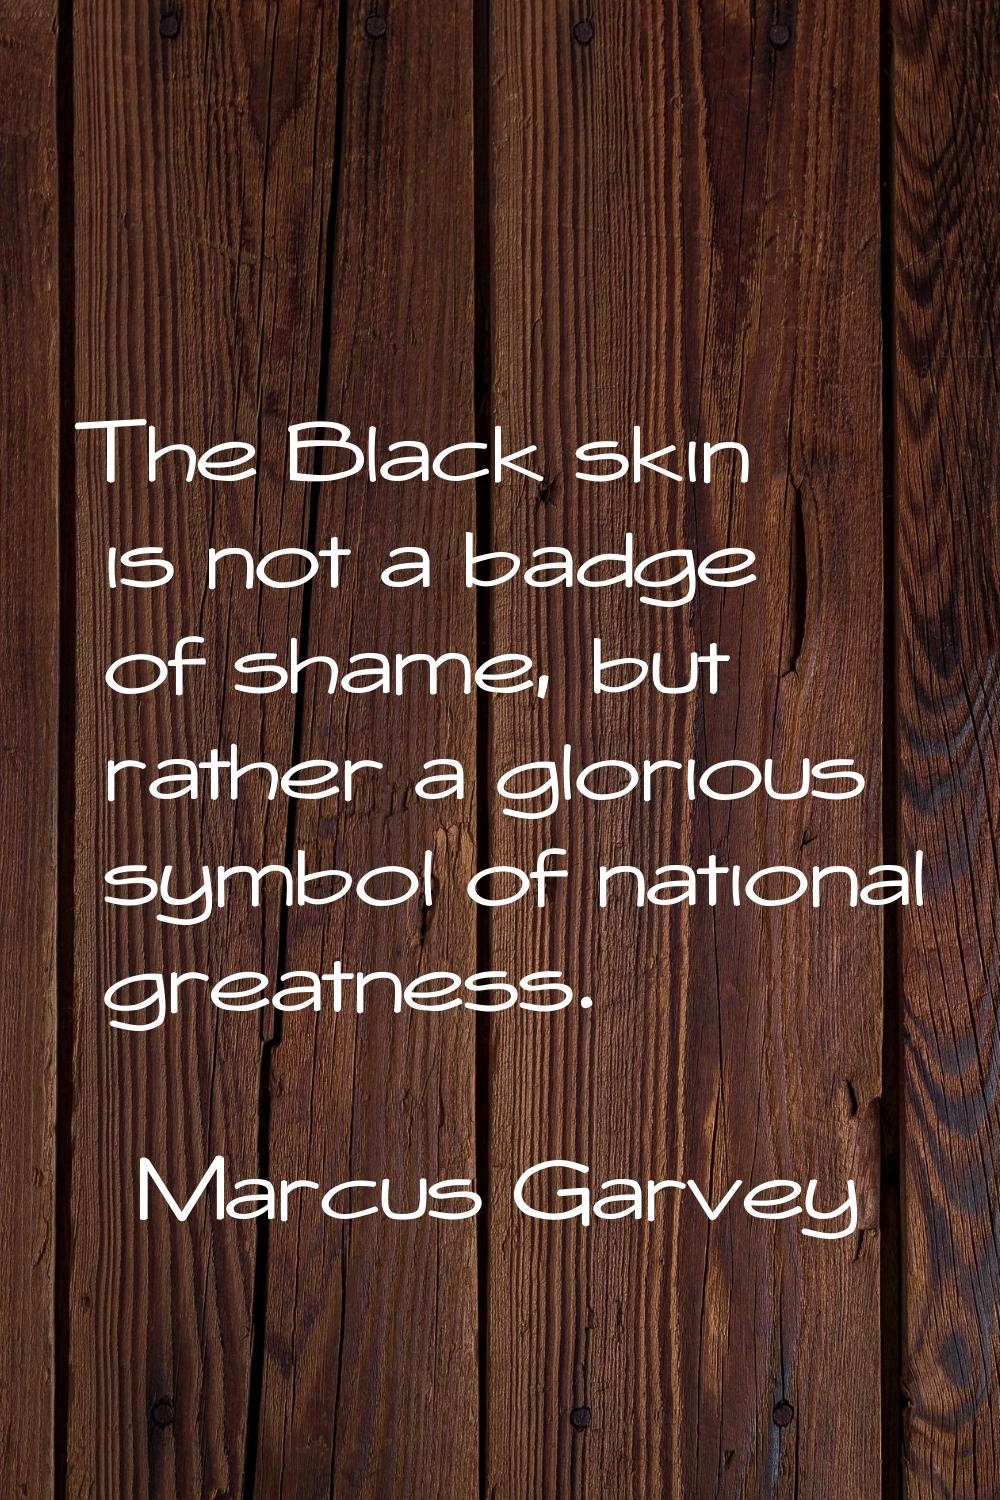 The Black skin is not a badge of shame, but rather a glorious symbol of national greatness.